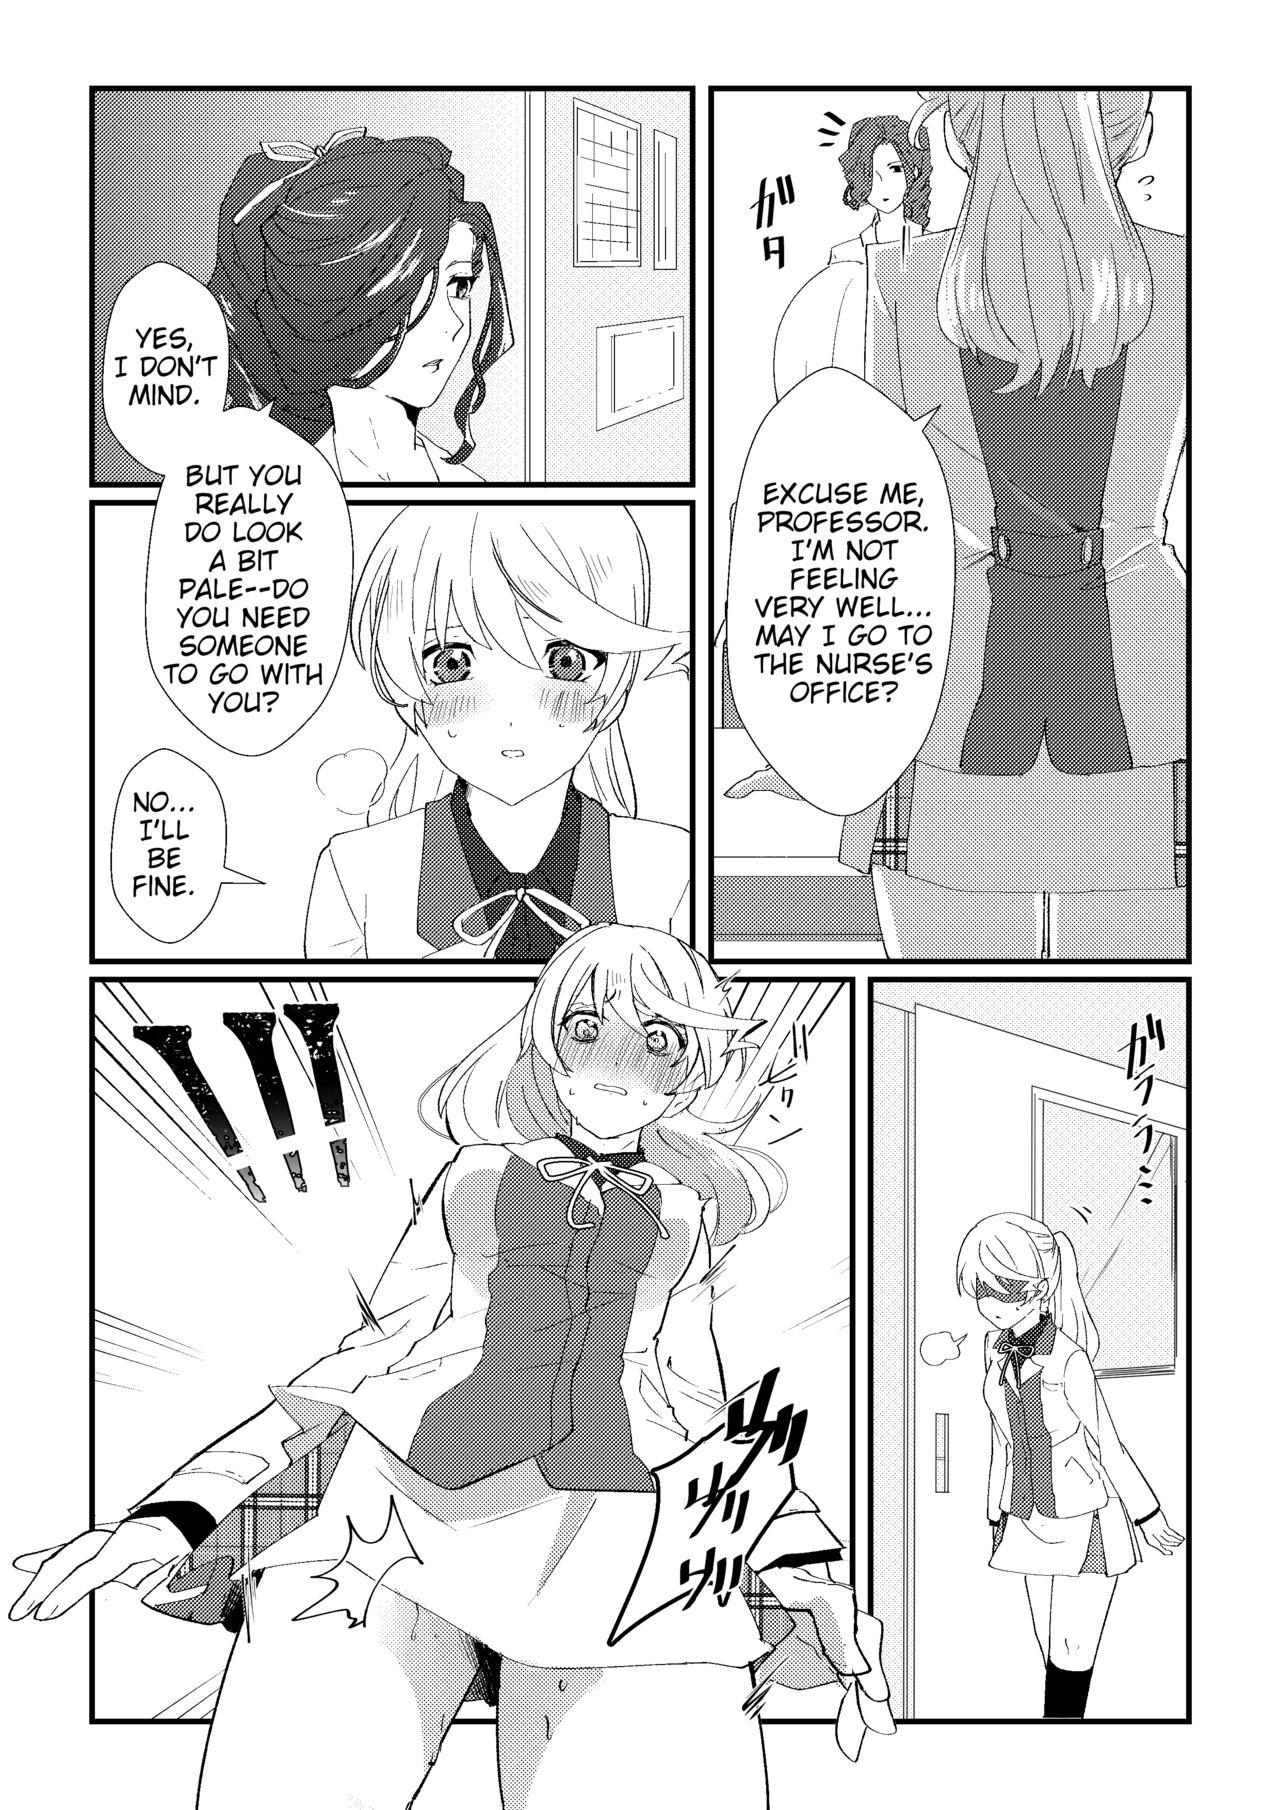 Perfect Tits crazy about you - Tales of zestiria Spank - Page 3